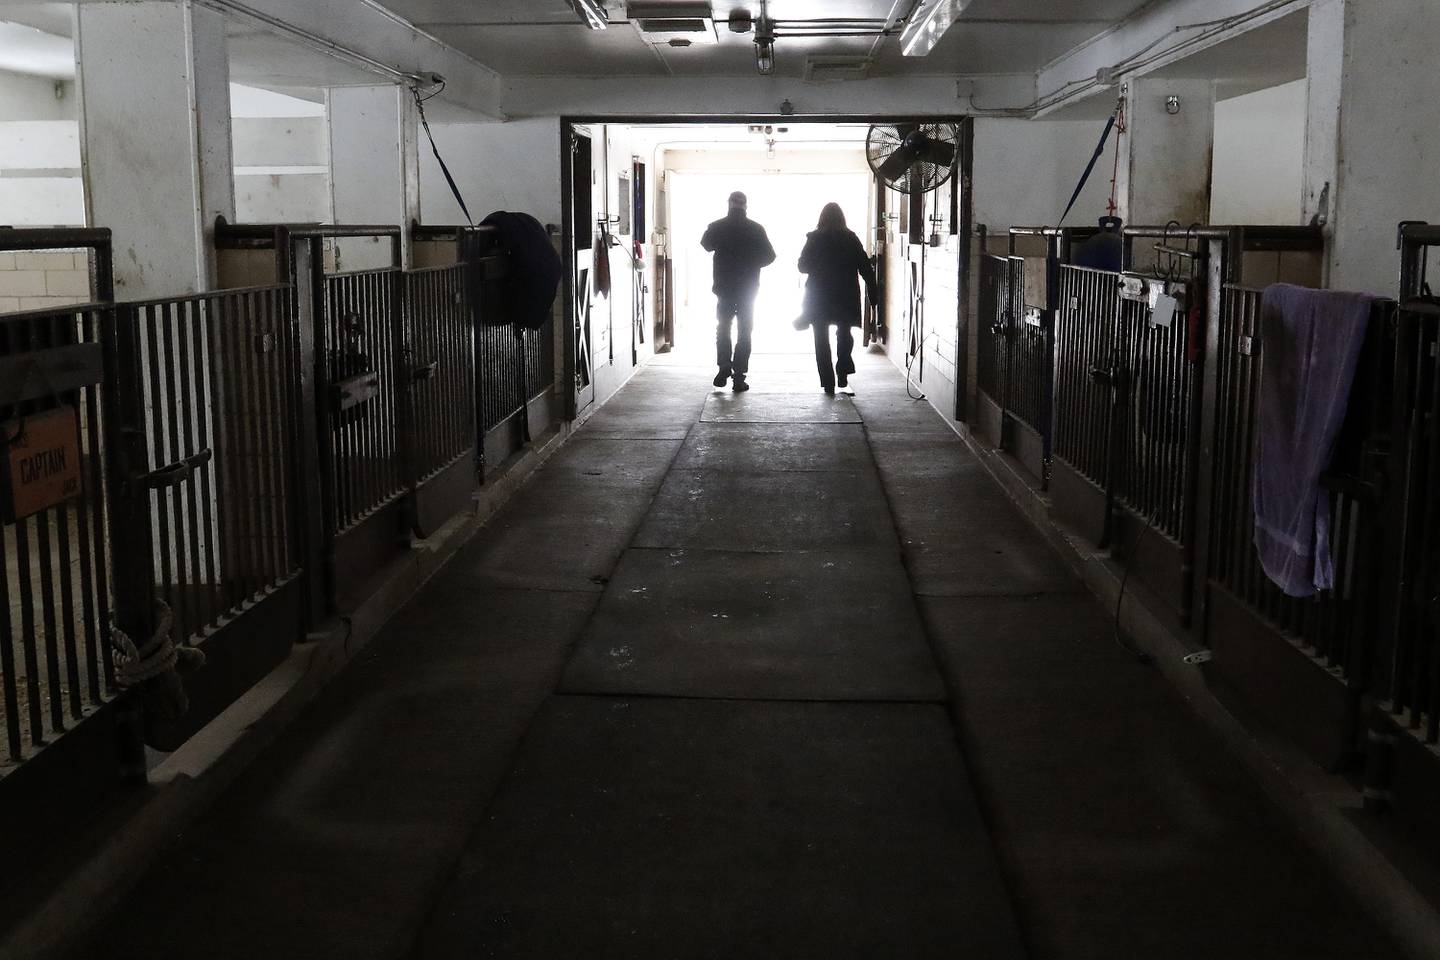 Bruce Johnson and Ann Somers walk through the stables on the first floor of the horse barn on Tuesday, Jan. 4, 2022 in the Village of Trout Valley.